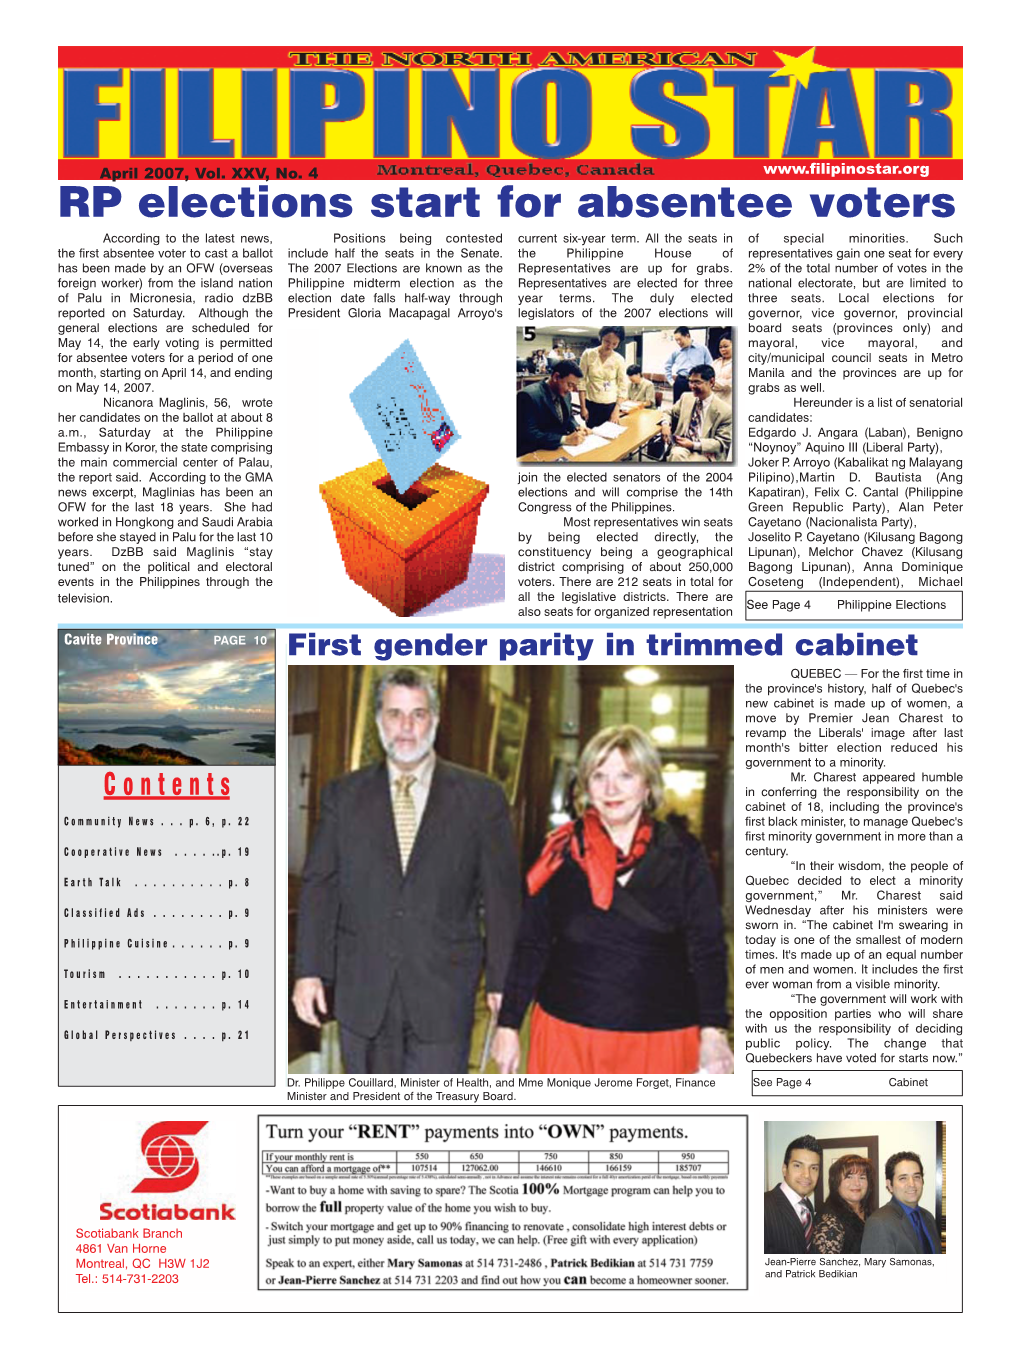 RP Elections Start for Absentee Voters According to the Latest News, Positions Being Contested Current Six-Year Term